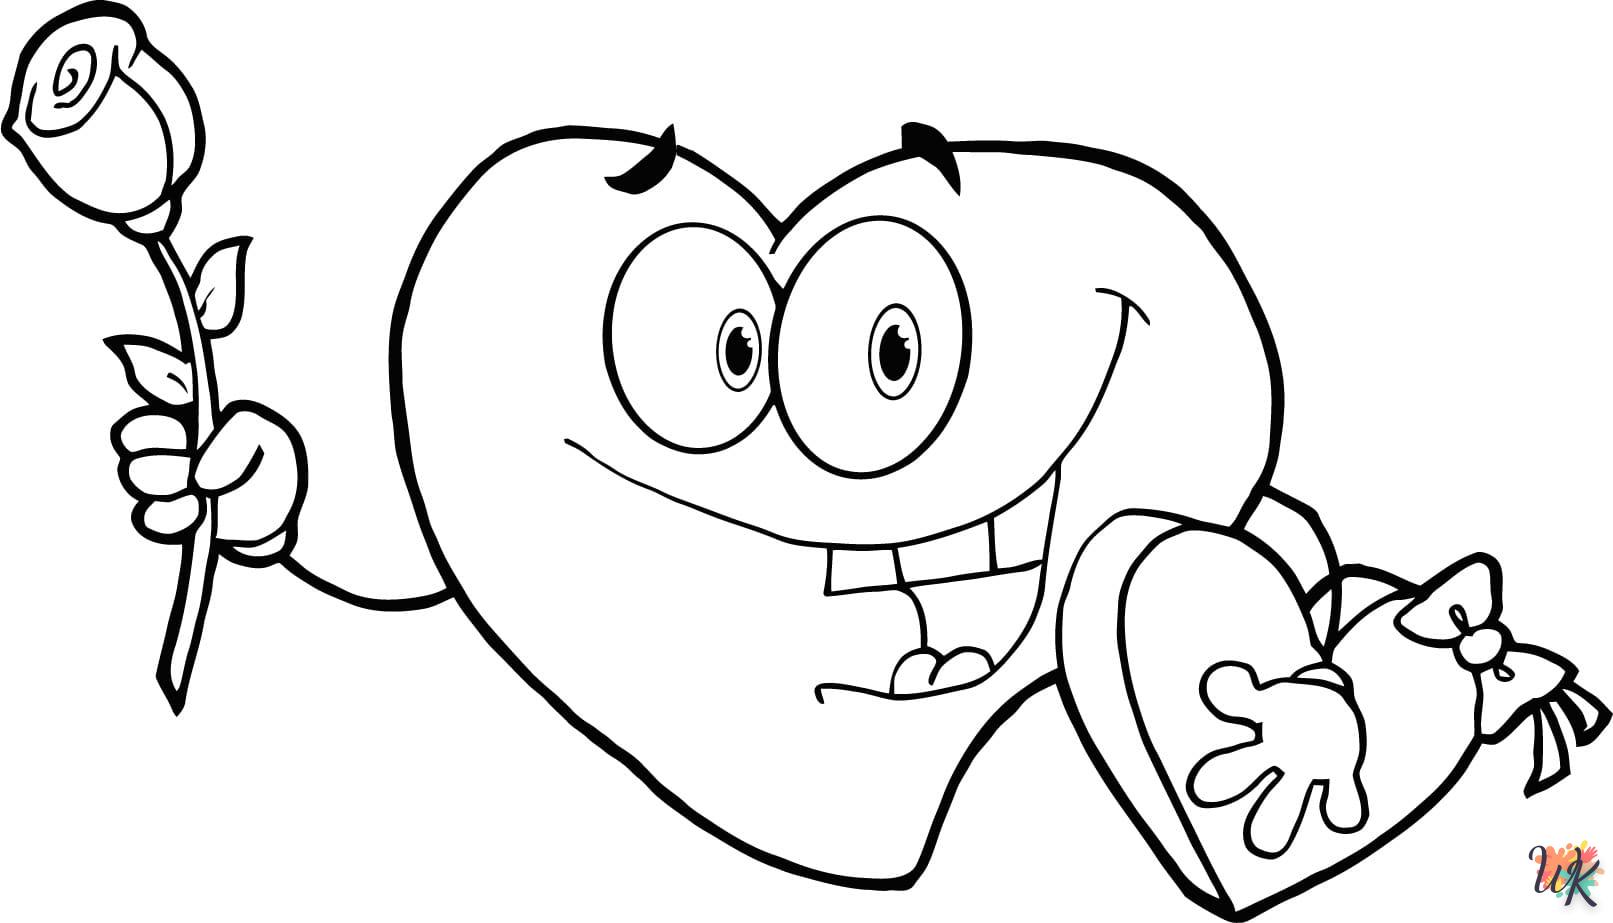 Baby heart coloring page to print free